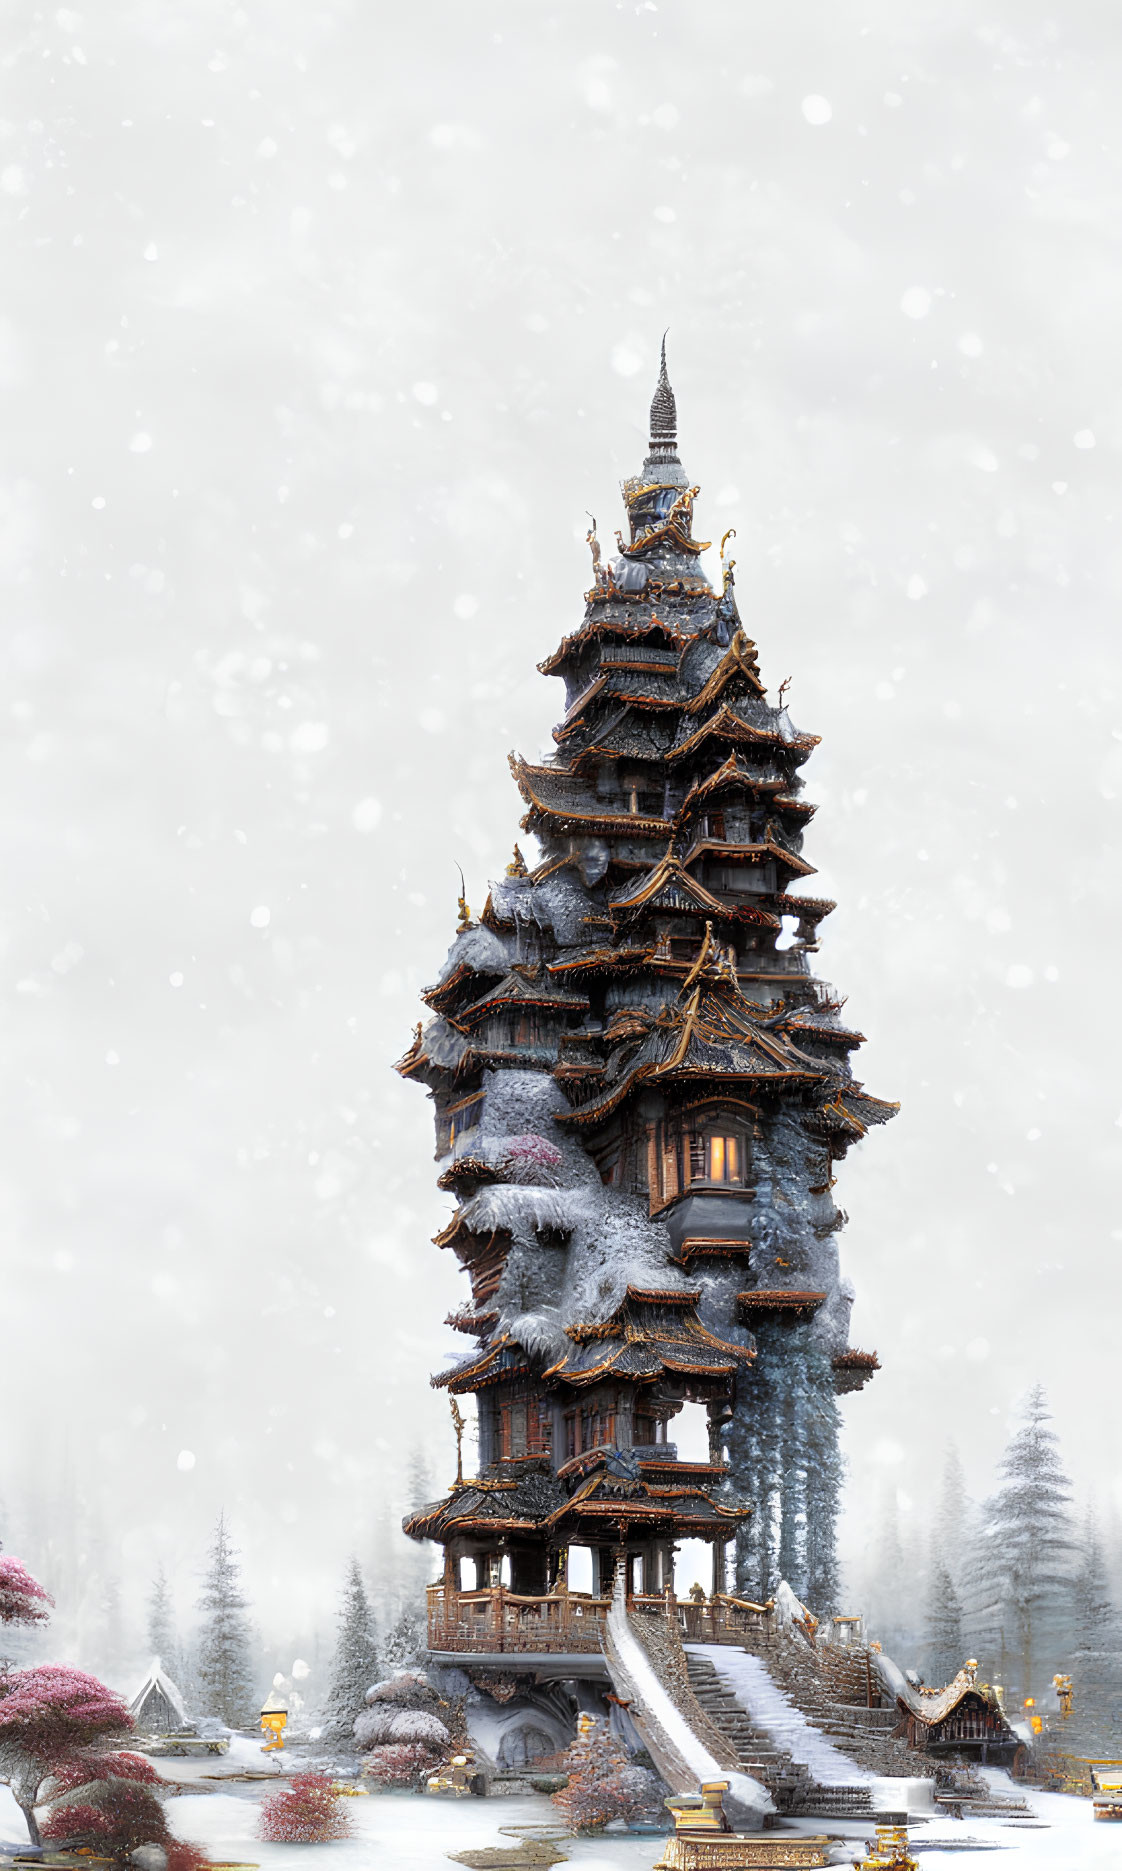 Traditional Asian Pagoda in Snowy Landscape with Pink and White Trees